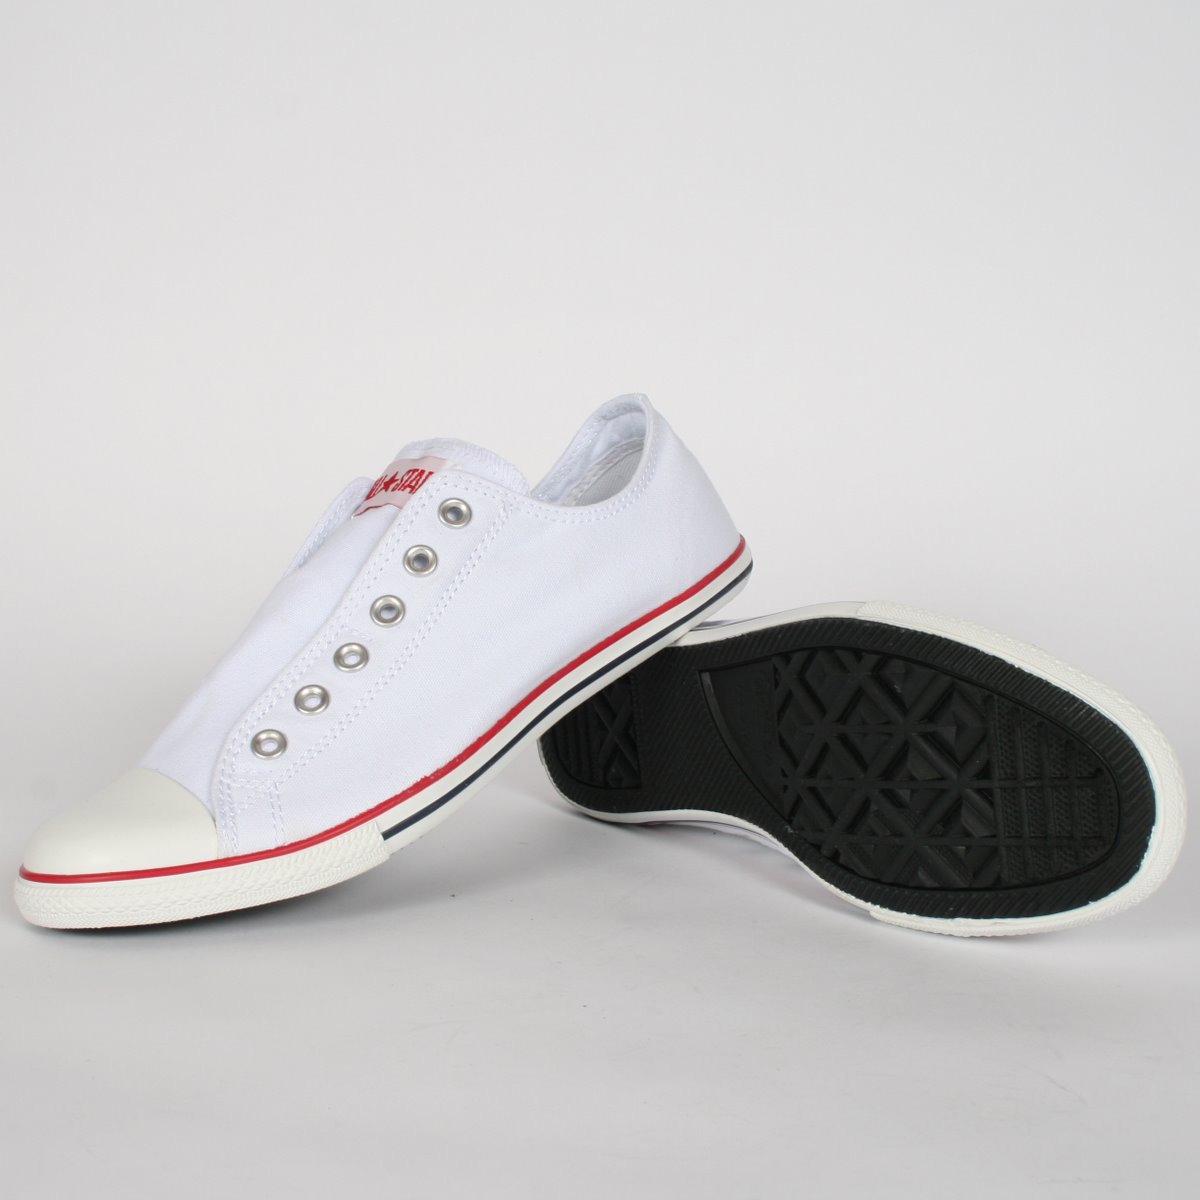 stole Kvittering Pointer Converse Chuck Taylor Slim Slip Low Top Shoes in White (121866F)